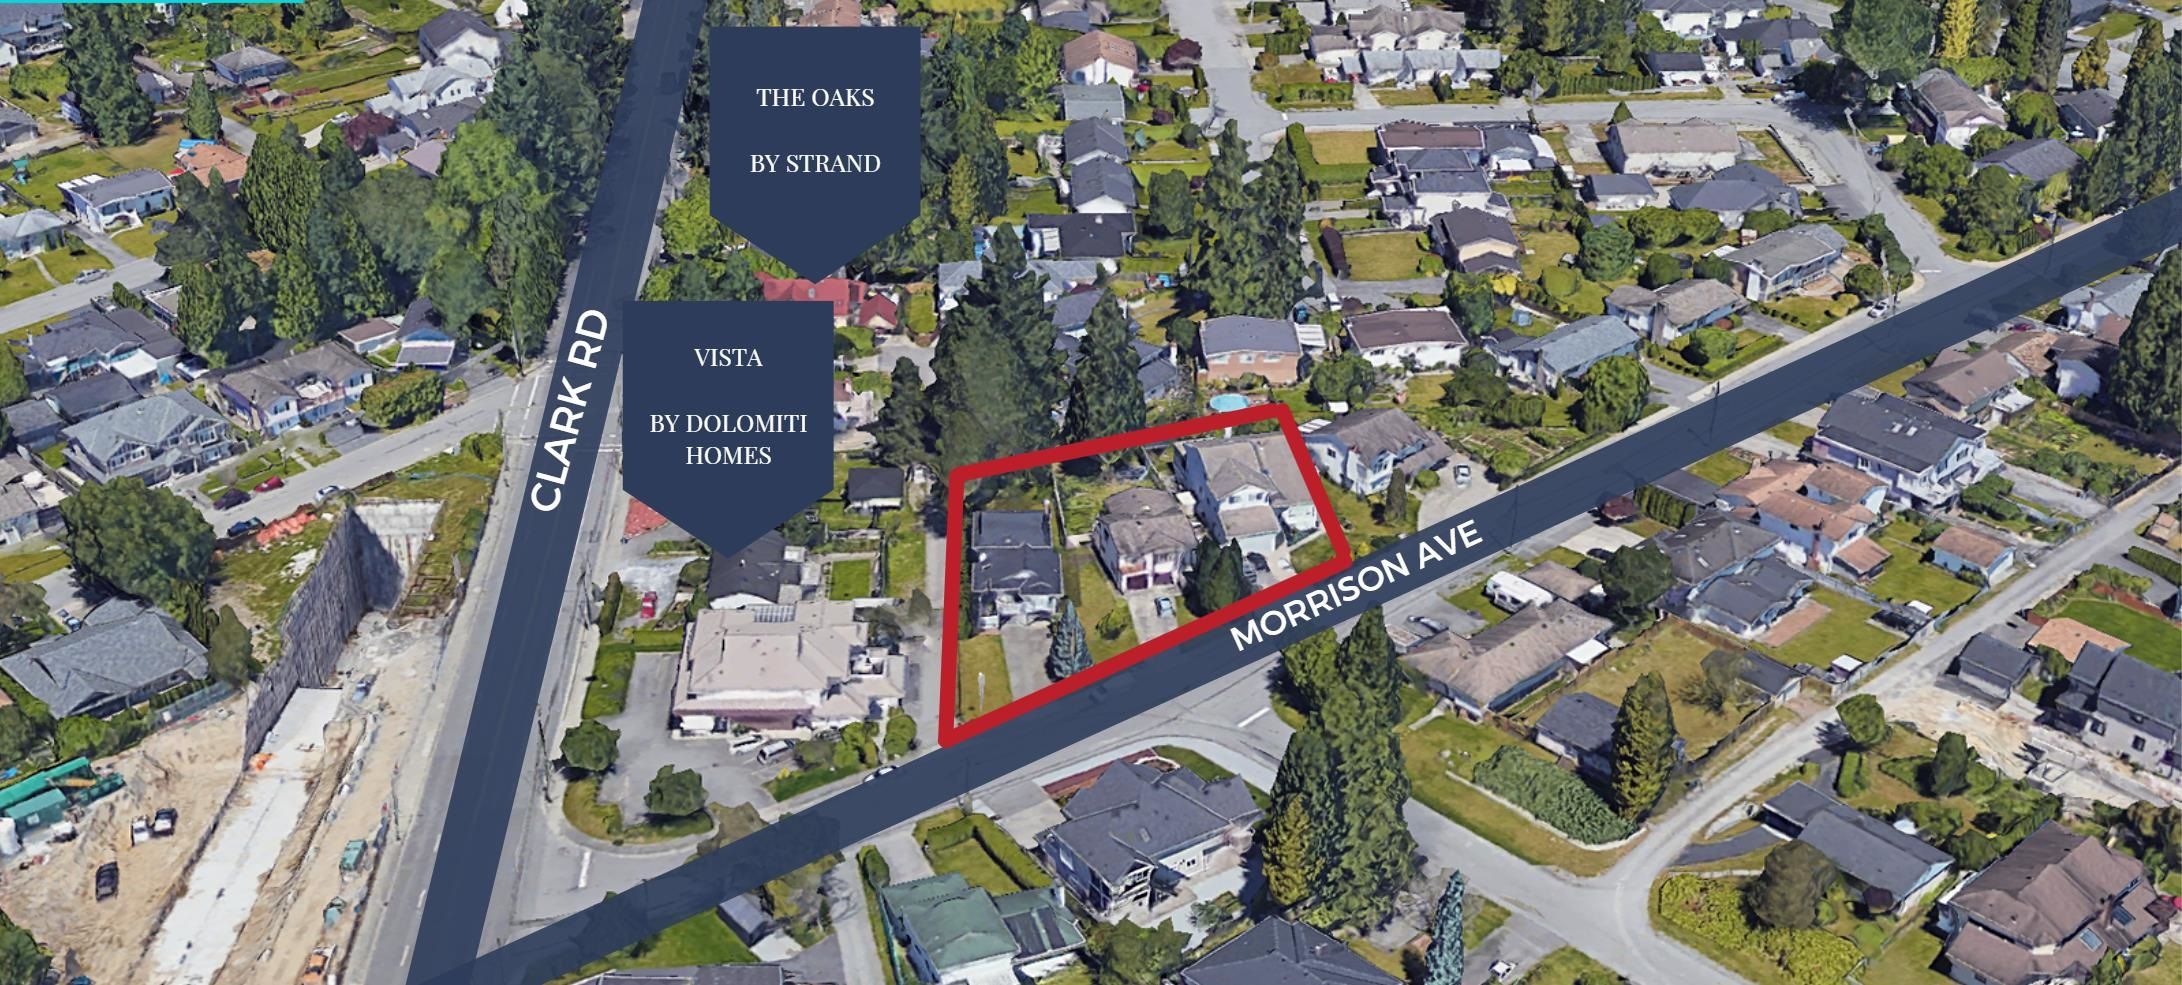 Main Photo: 653 MORRISON Avenue in Coquitlam: Coquitlam West Land Commercial for sale : MLS®# C8042121